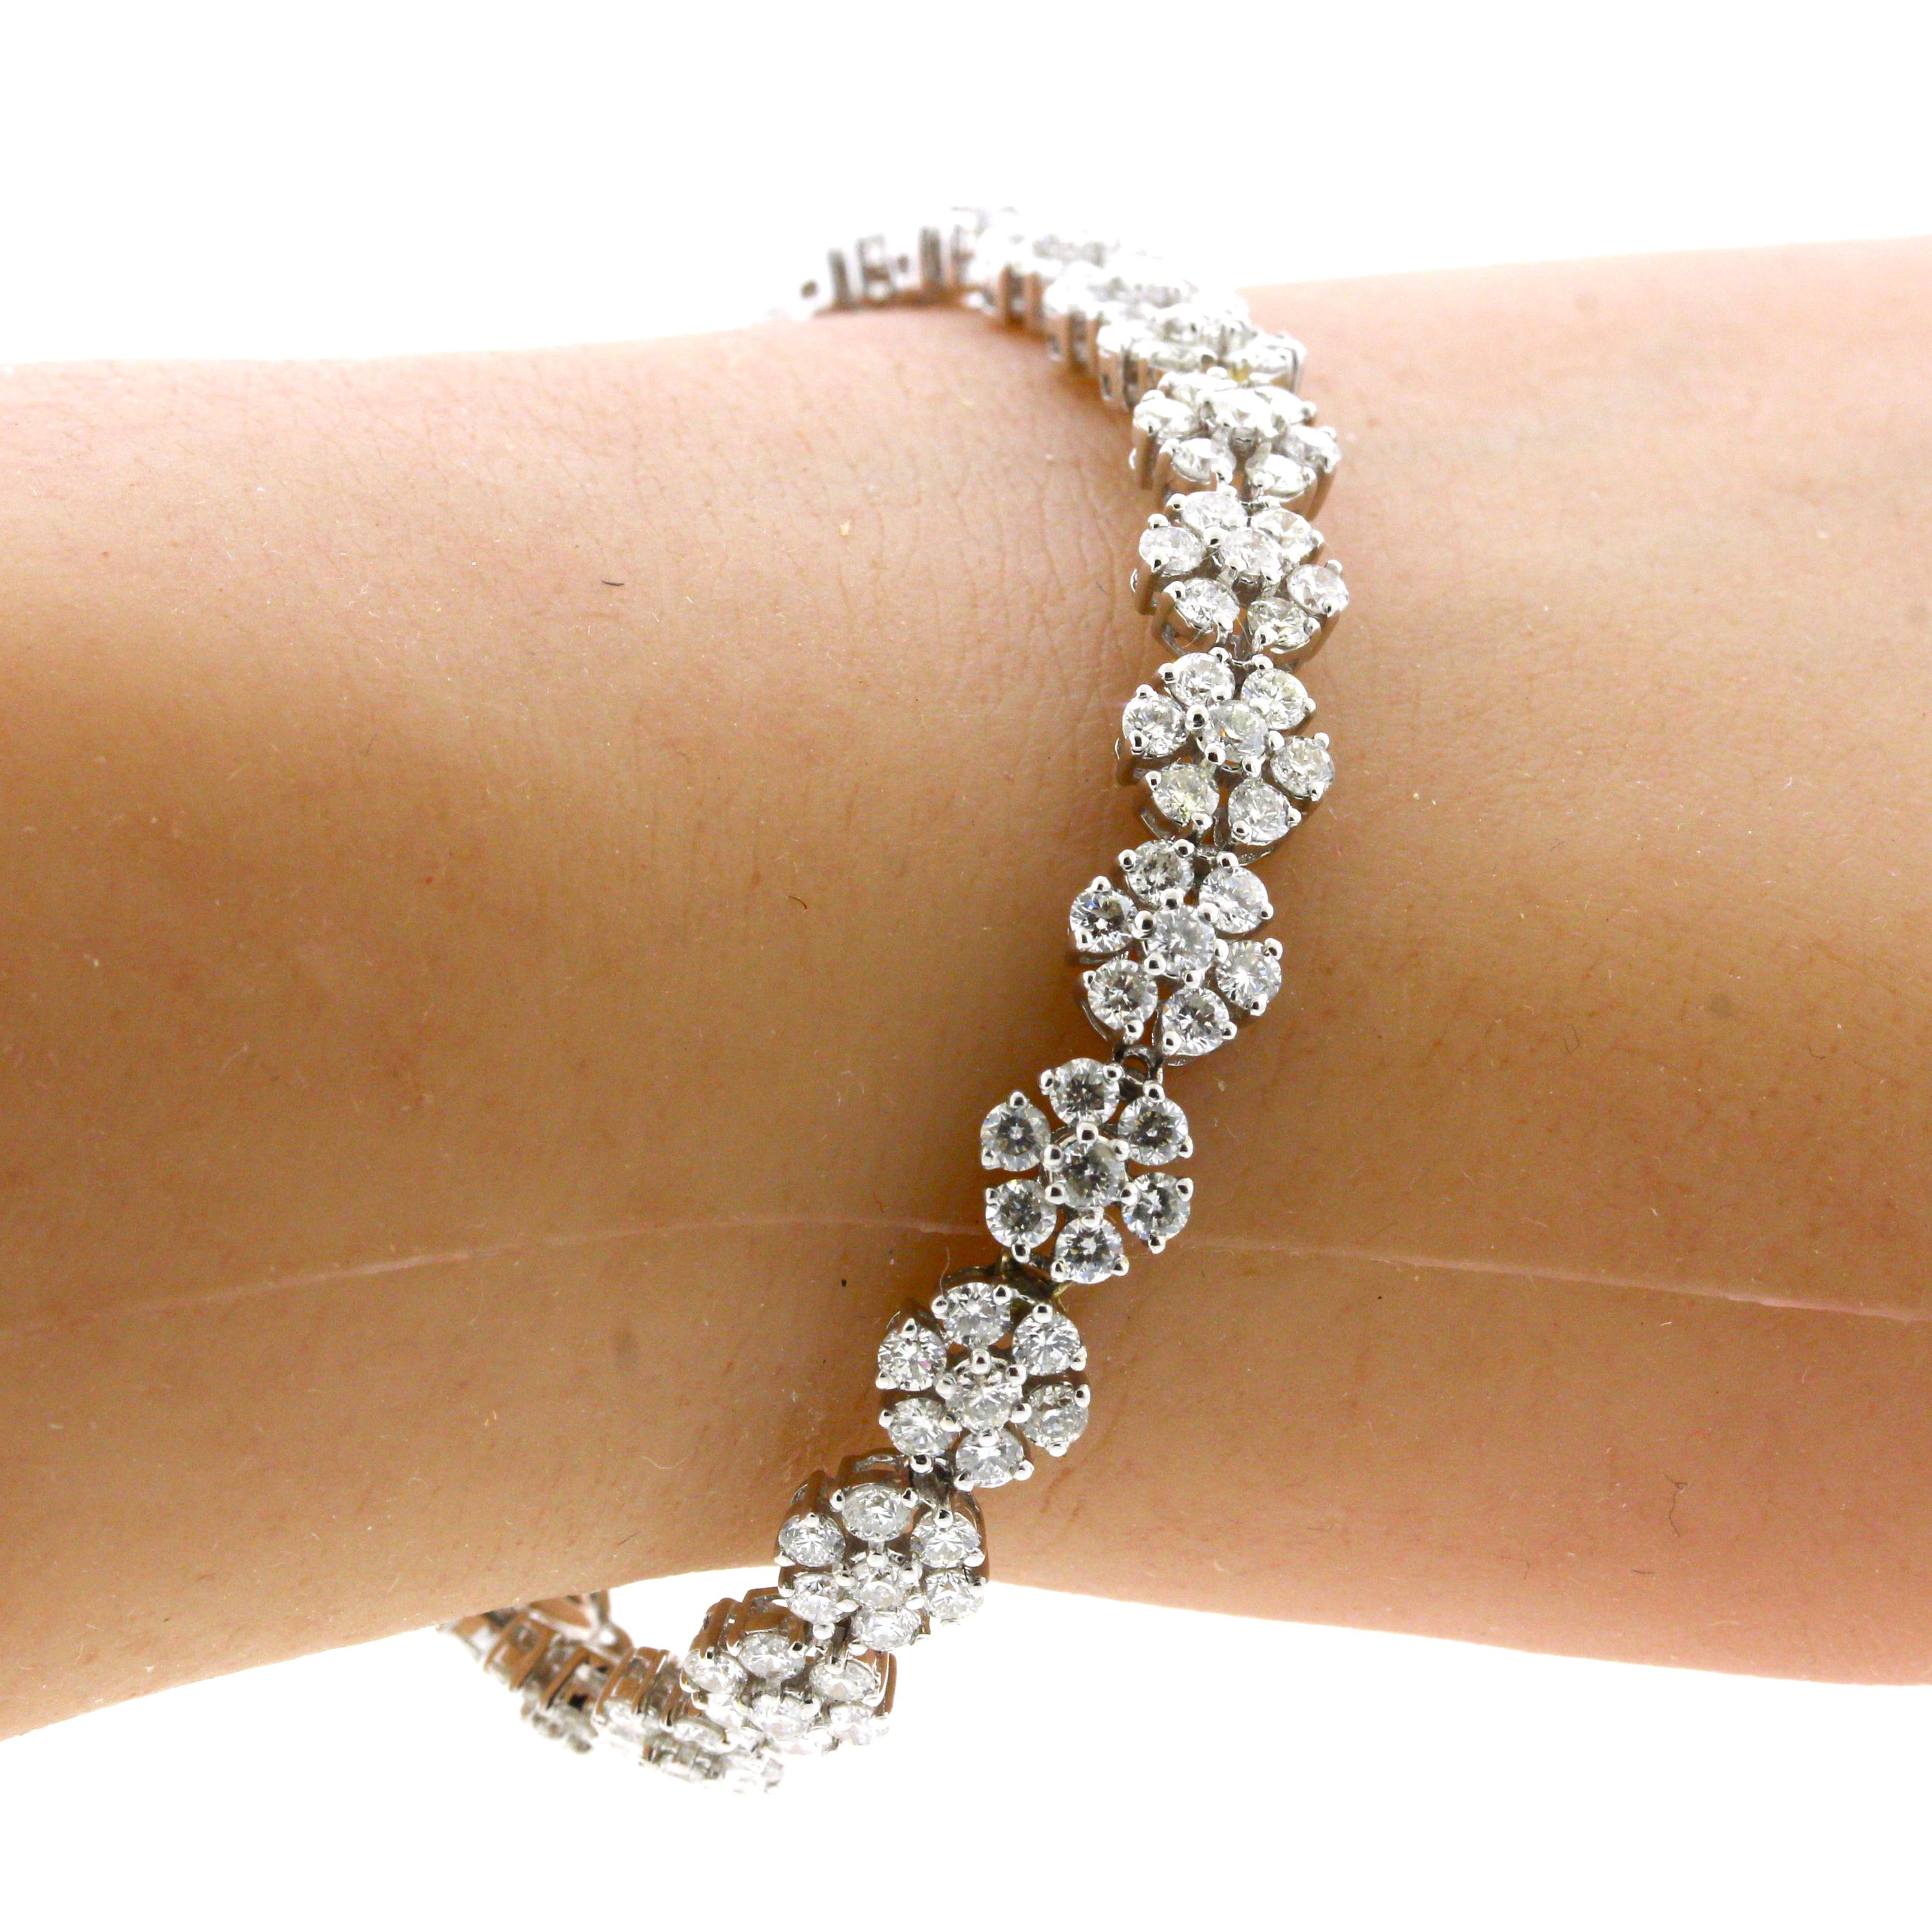 A sweet and stylish flower motif tennis bracelet featuring 7.36 carats of round brilliant-cut diamonds. There are a total of 25 individual diamond flowers set in a row. Made in 18k white gold and ready to be worn.

Length: 7 inches

Weight: 12.9